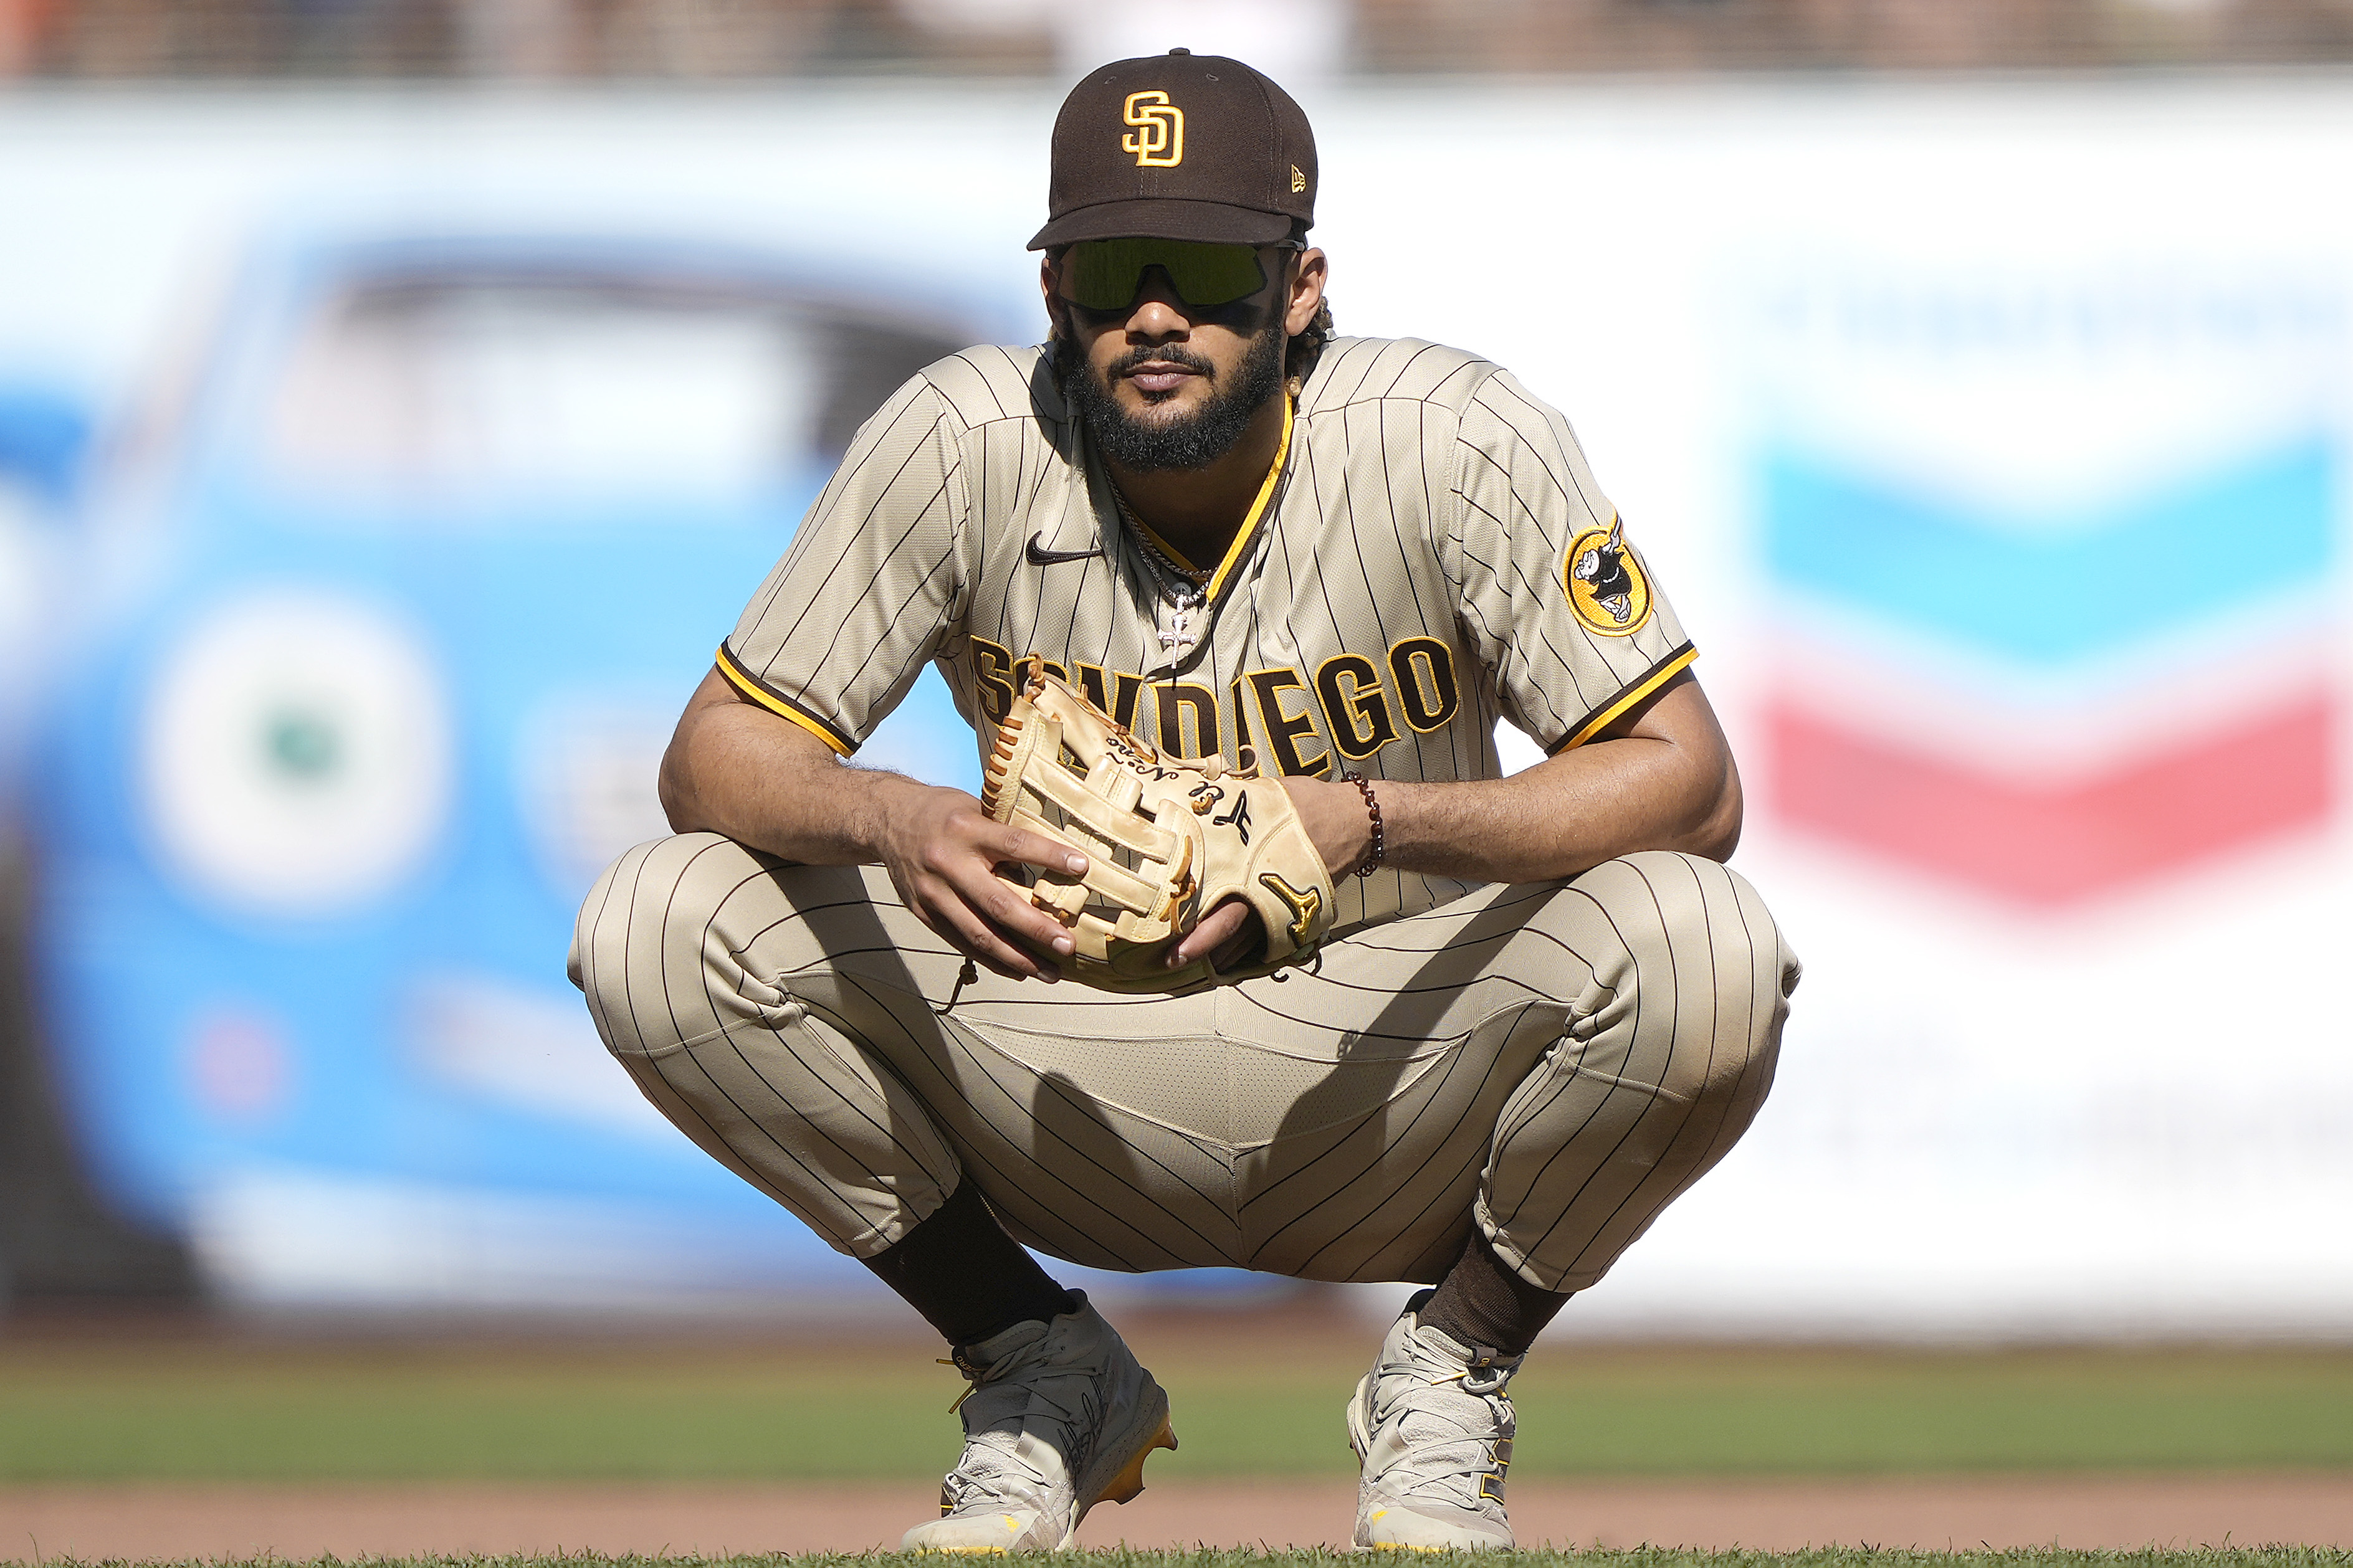 San Diego Padres star Fernando Tatis Jr. labeled a 'cheater' by a